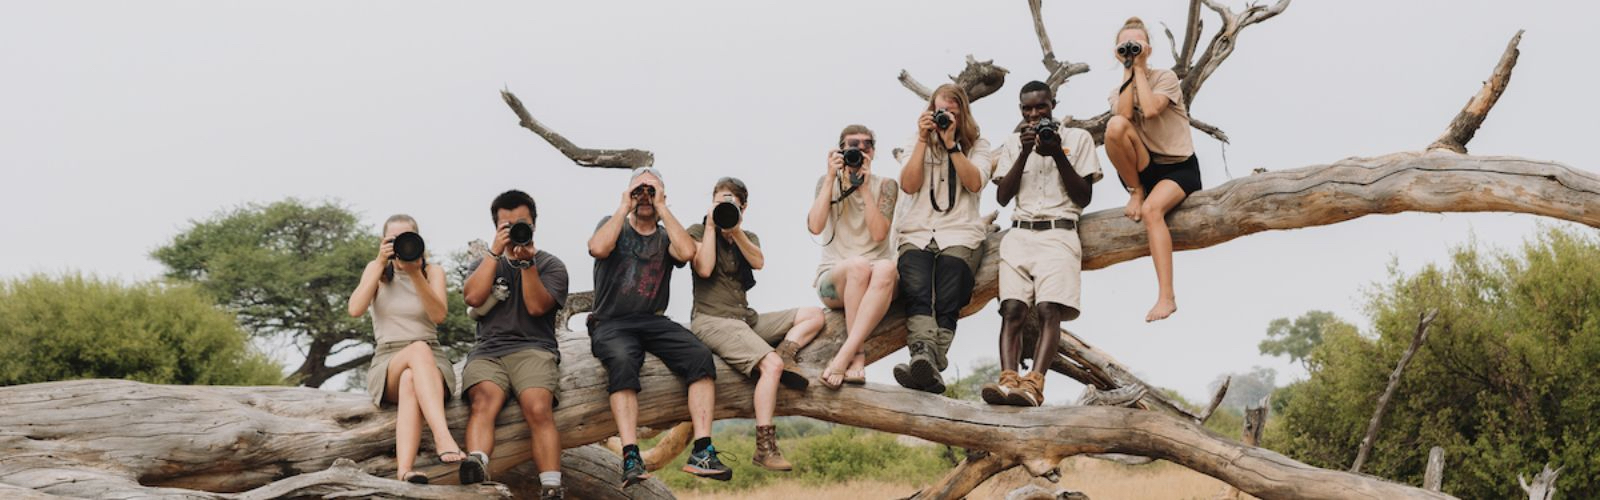 9 Reasons to Become a Wildlife Photography Volunteer Abroad